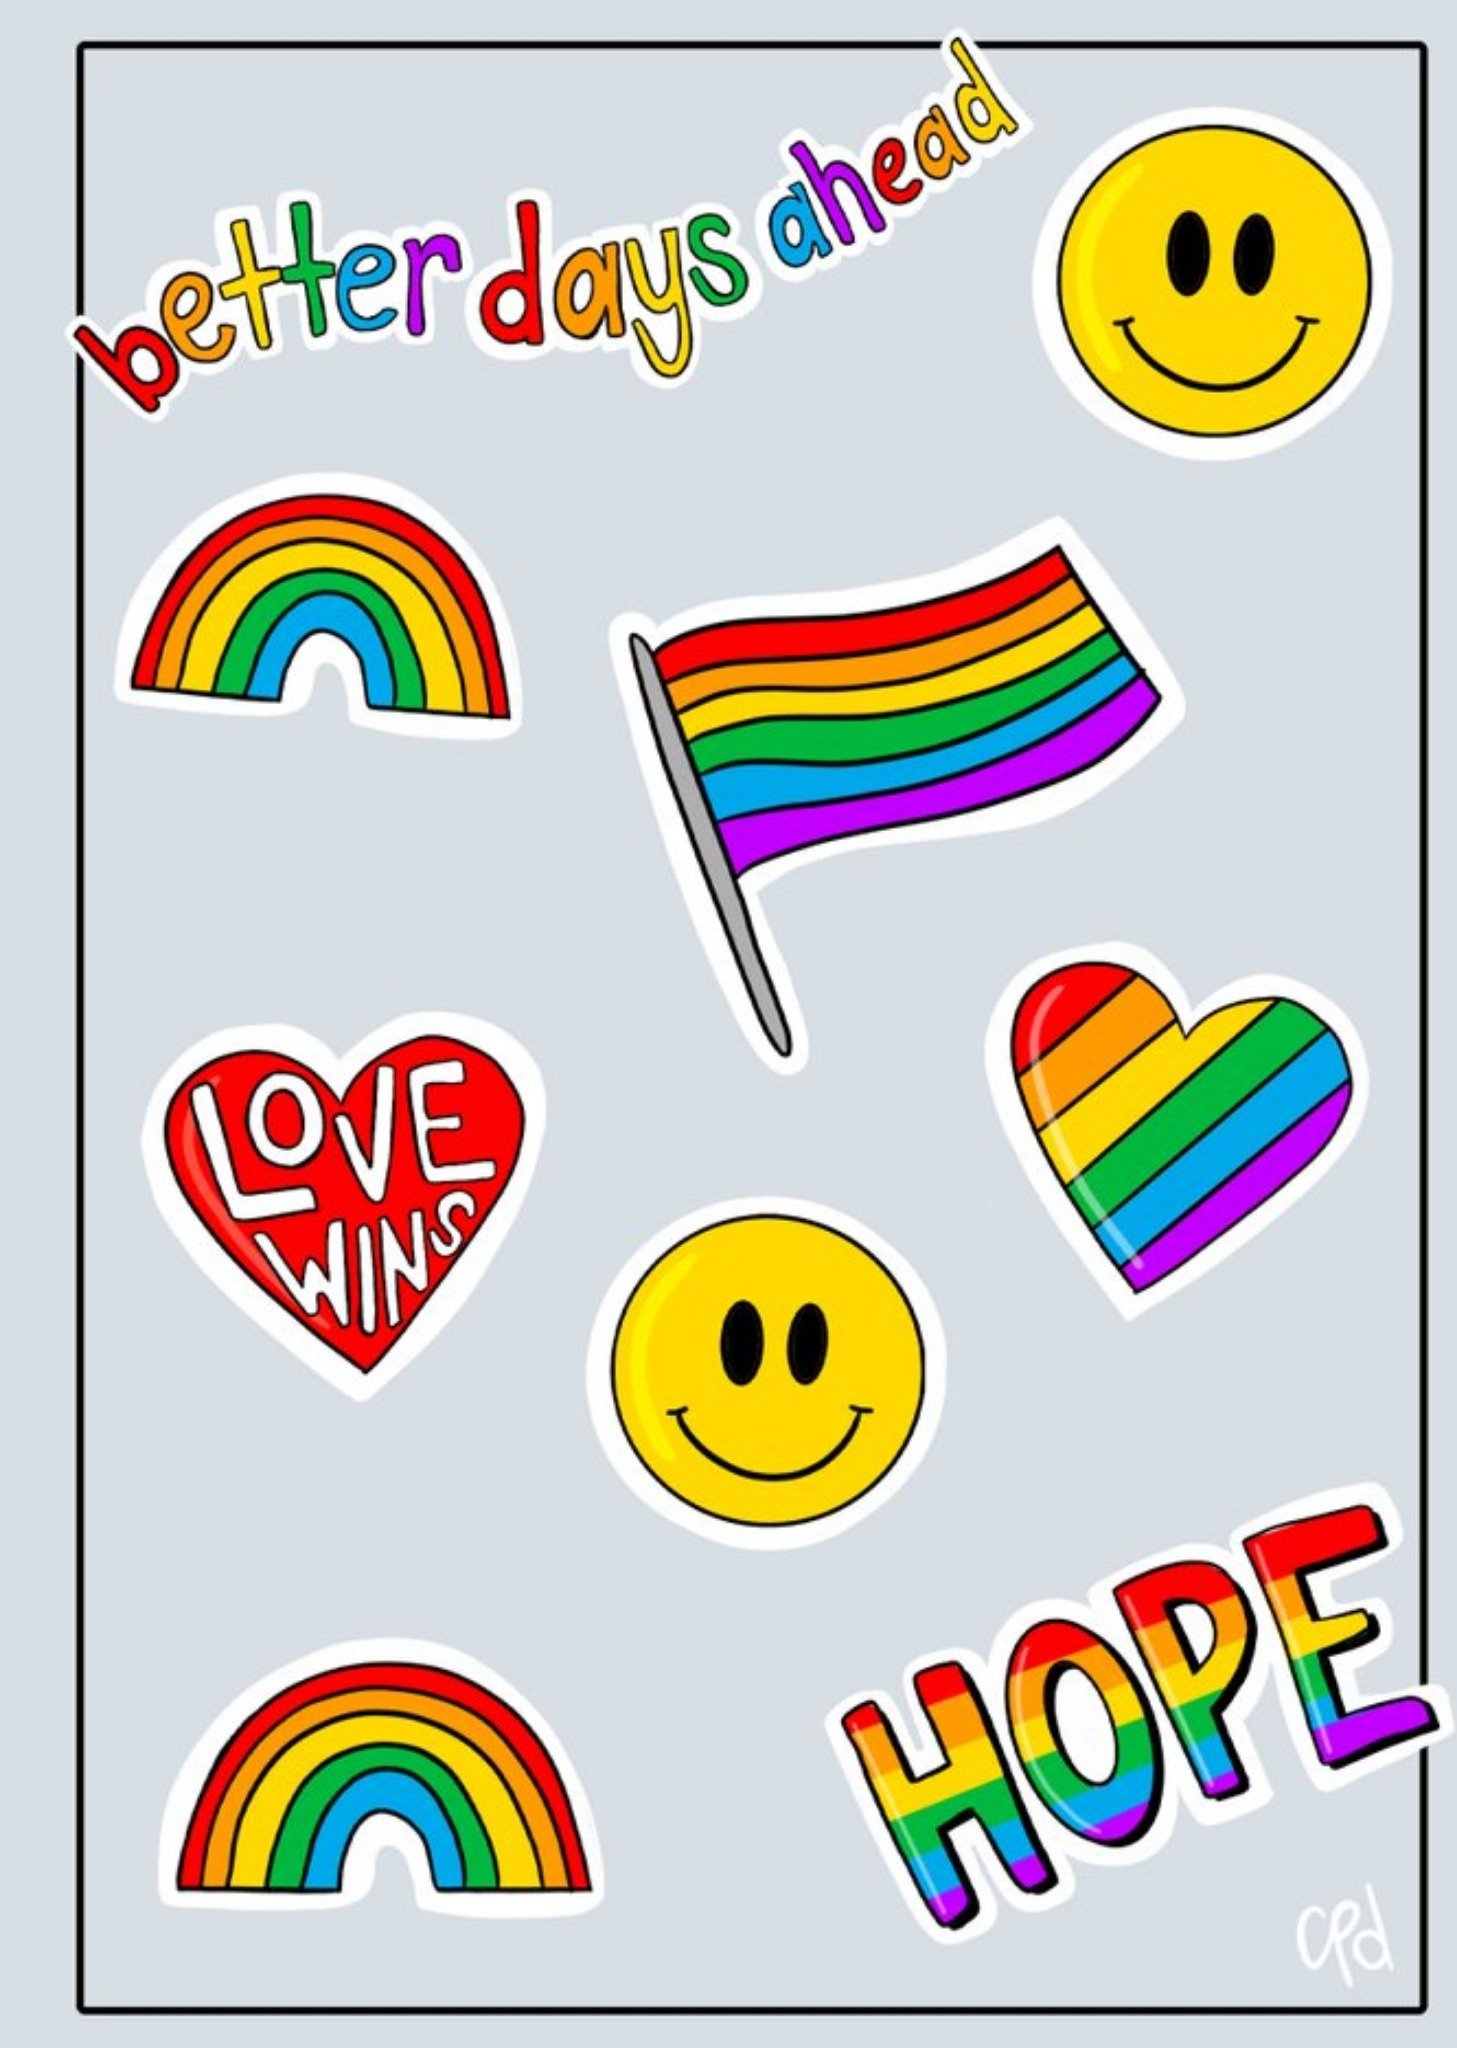 Moonpig Bright Graphic Rainbow Icons Better Days Ahead, Love Wins, Hope Card, Large